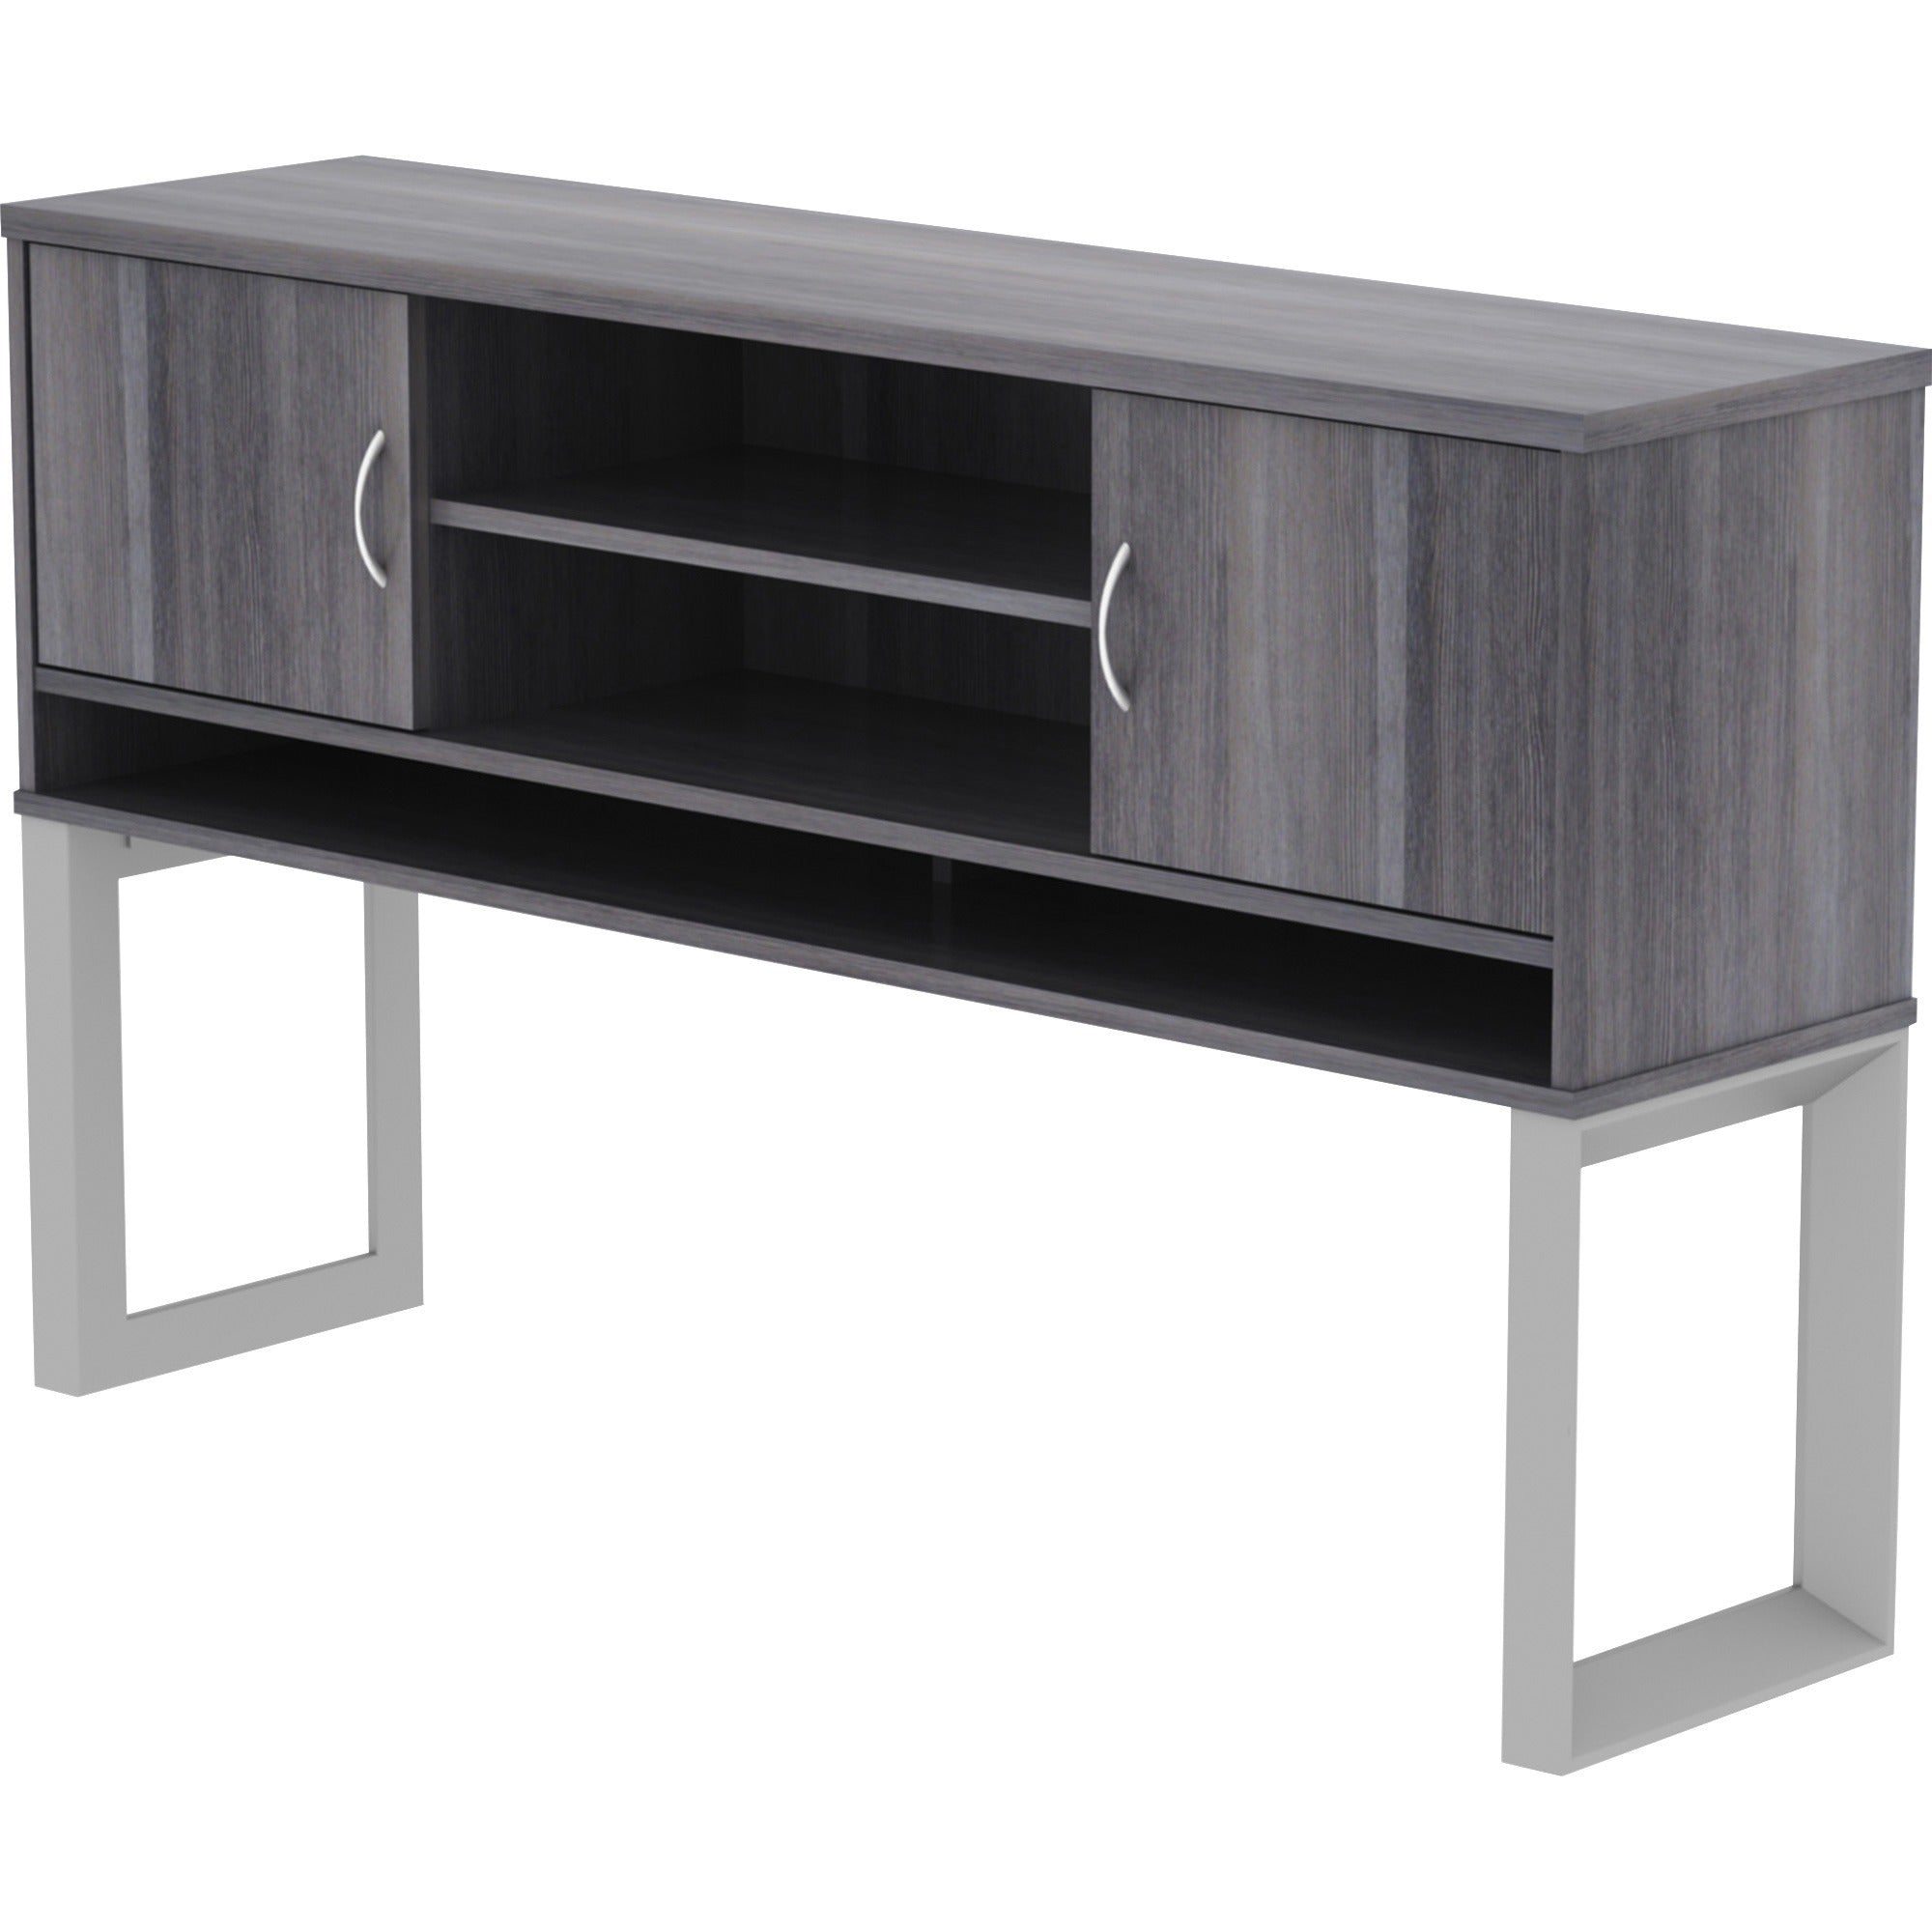 lorell-relevance-series-freestanding-hutch-59-x-1536-3-shelves-finish-charcoal-laminate_llr16219 - 3